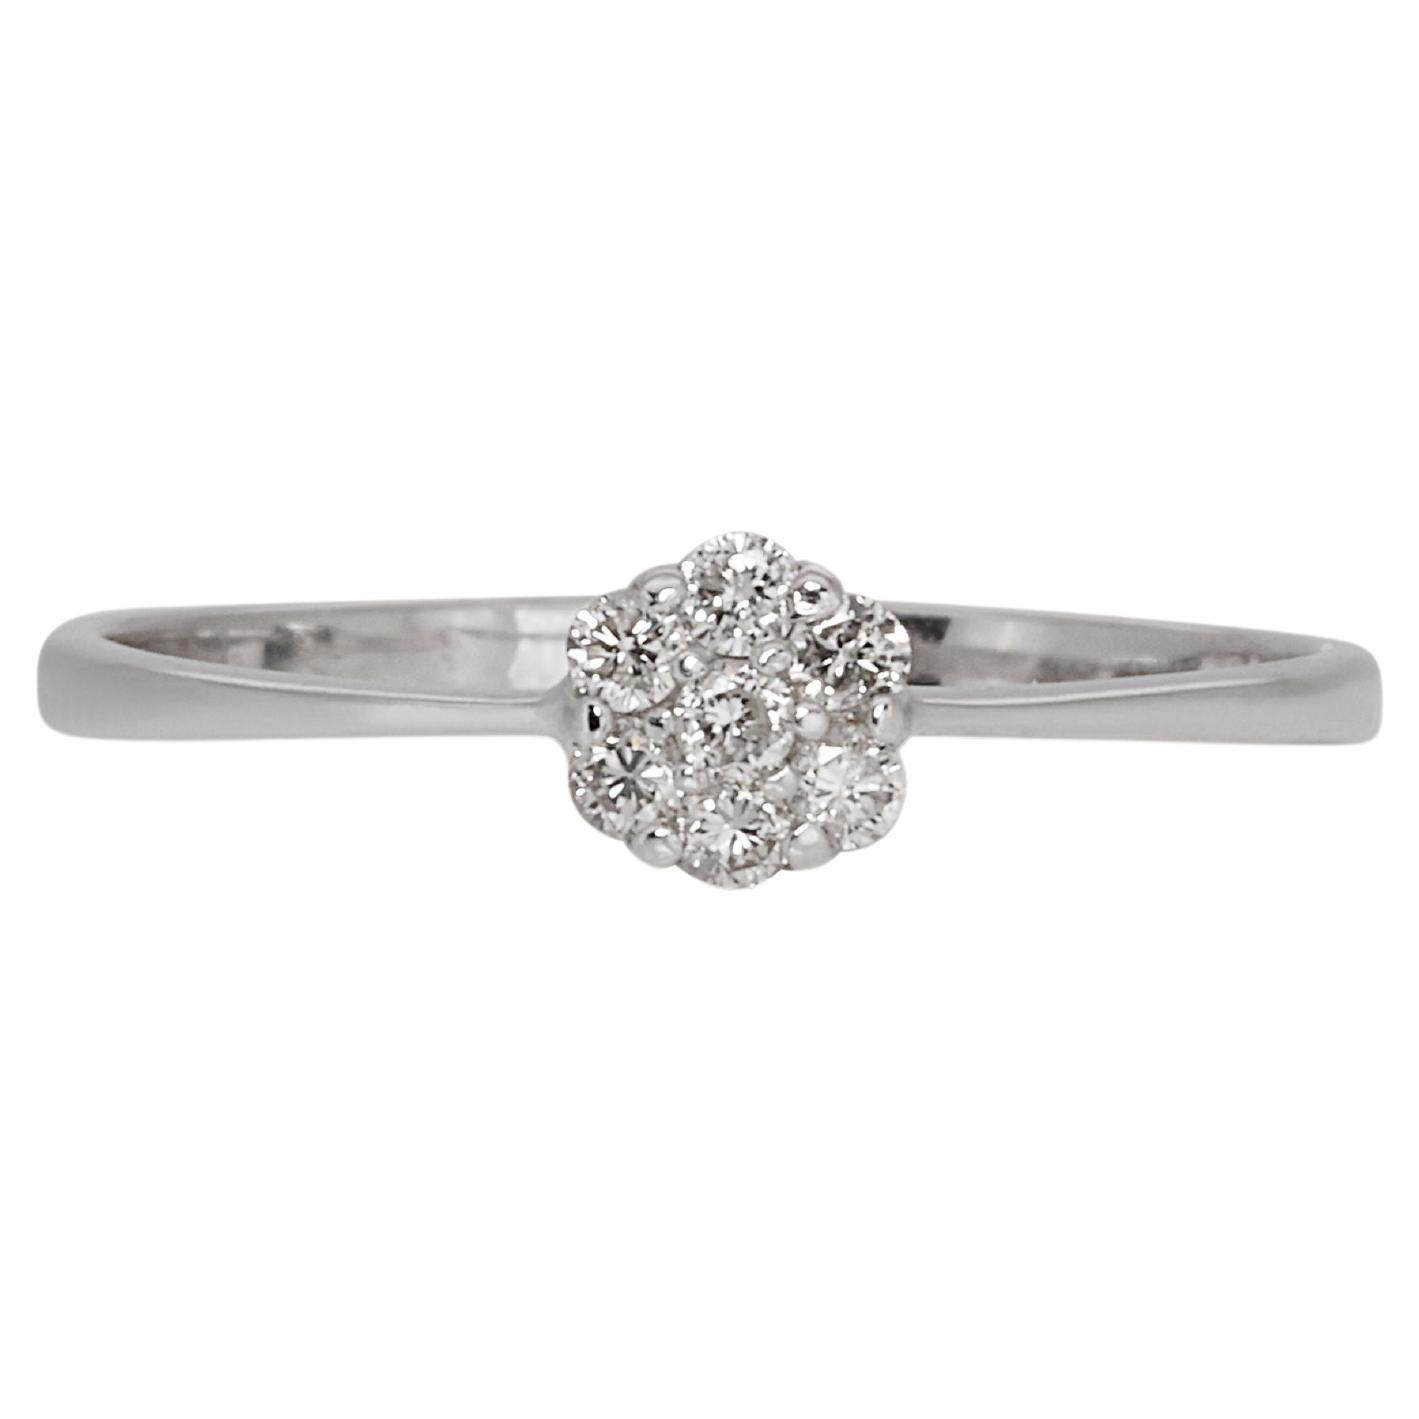 Sparkling 18k White Gold Diamond Ring with .20ct Natural Diamond For Sale